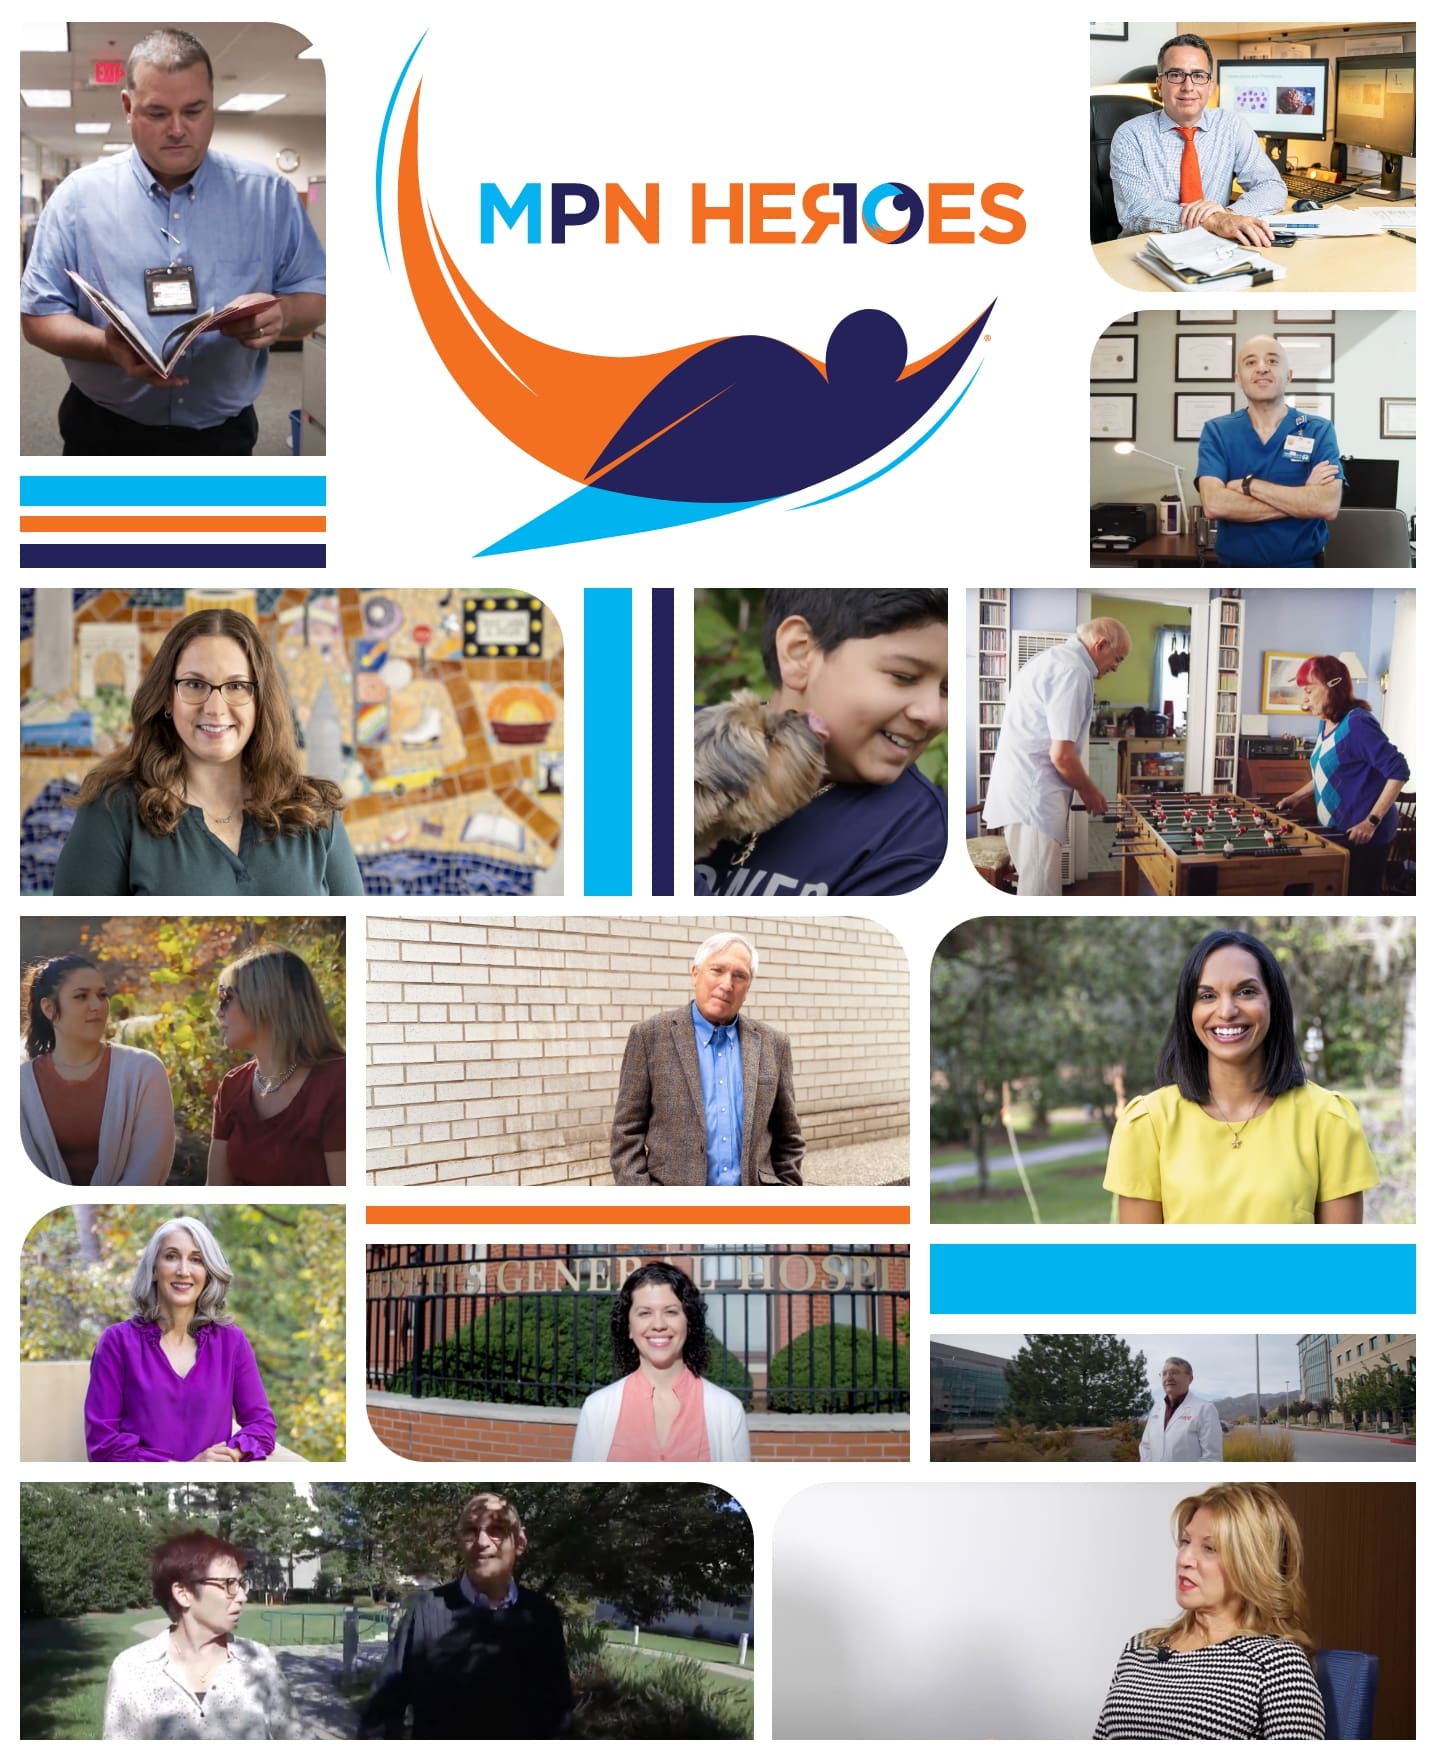 Experience 10 Years of the MPN Heroes Program